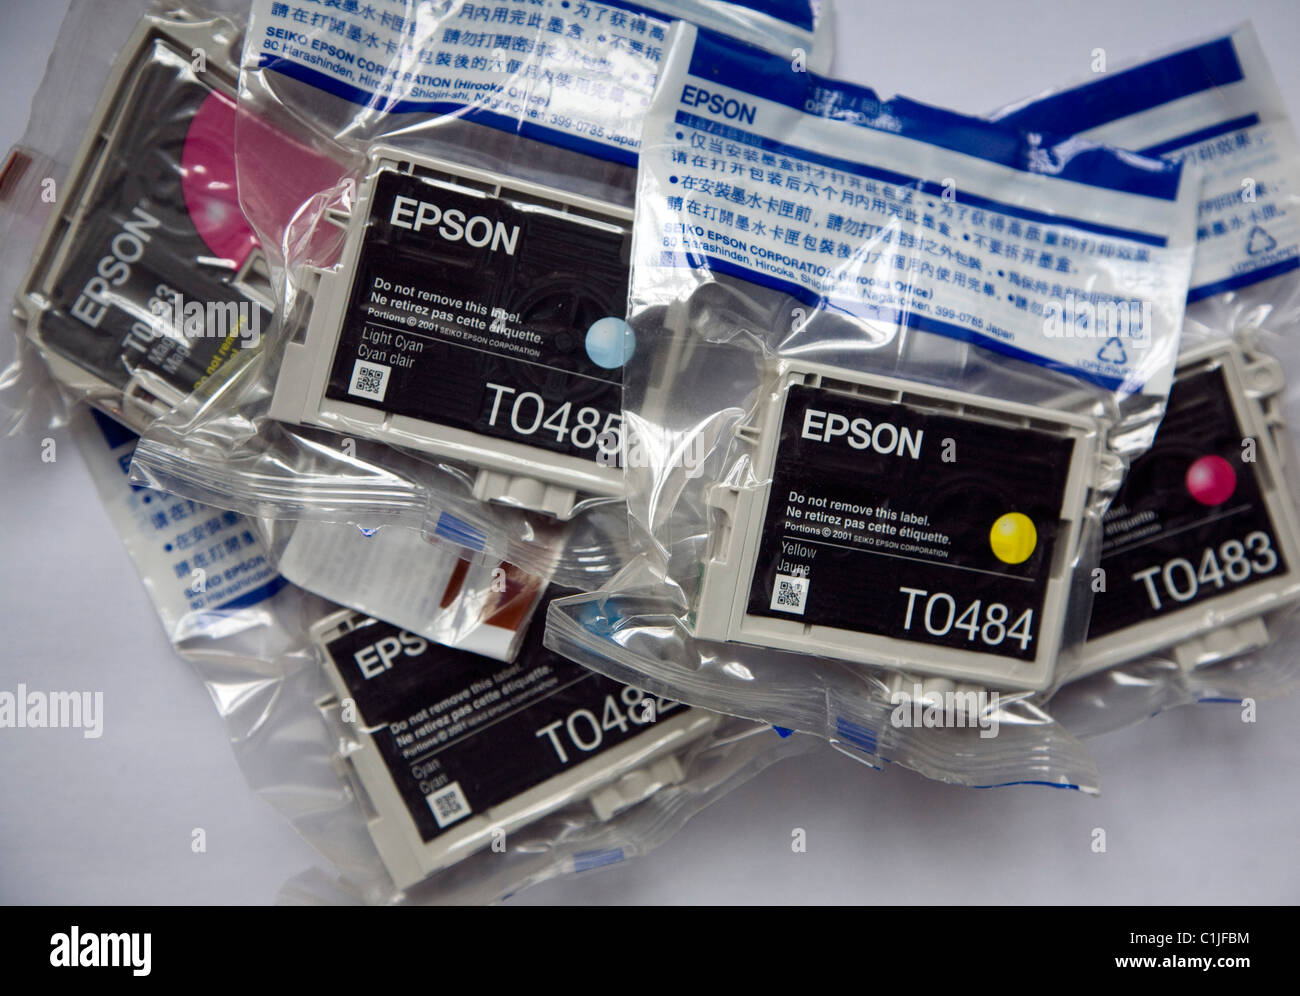 Epson colour printer ink packages Stock Photo